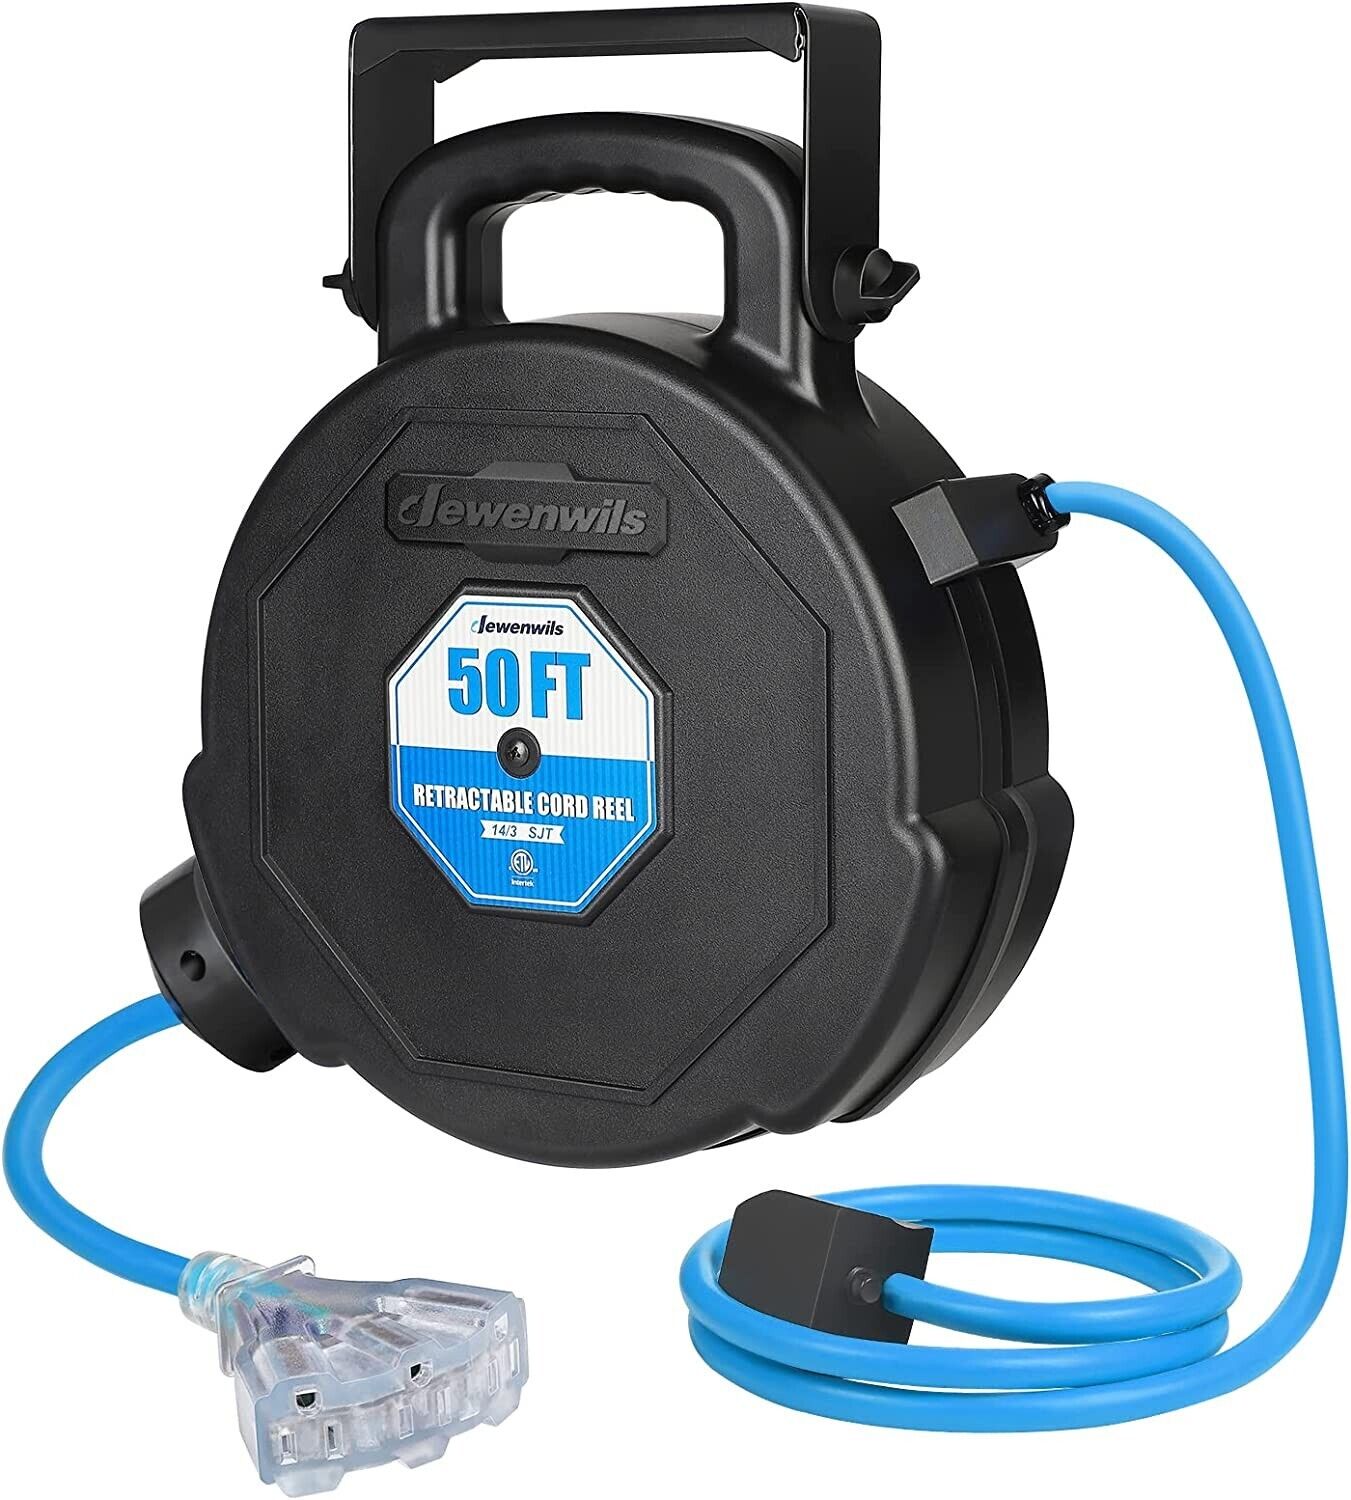 Wall/Ceiling 50FT Heavy Duty Power Cord Reel, Retractable